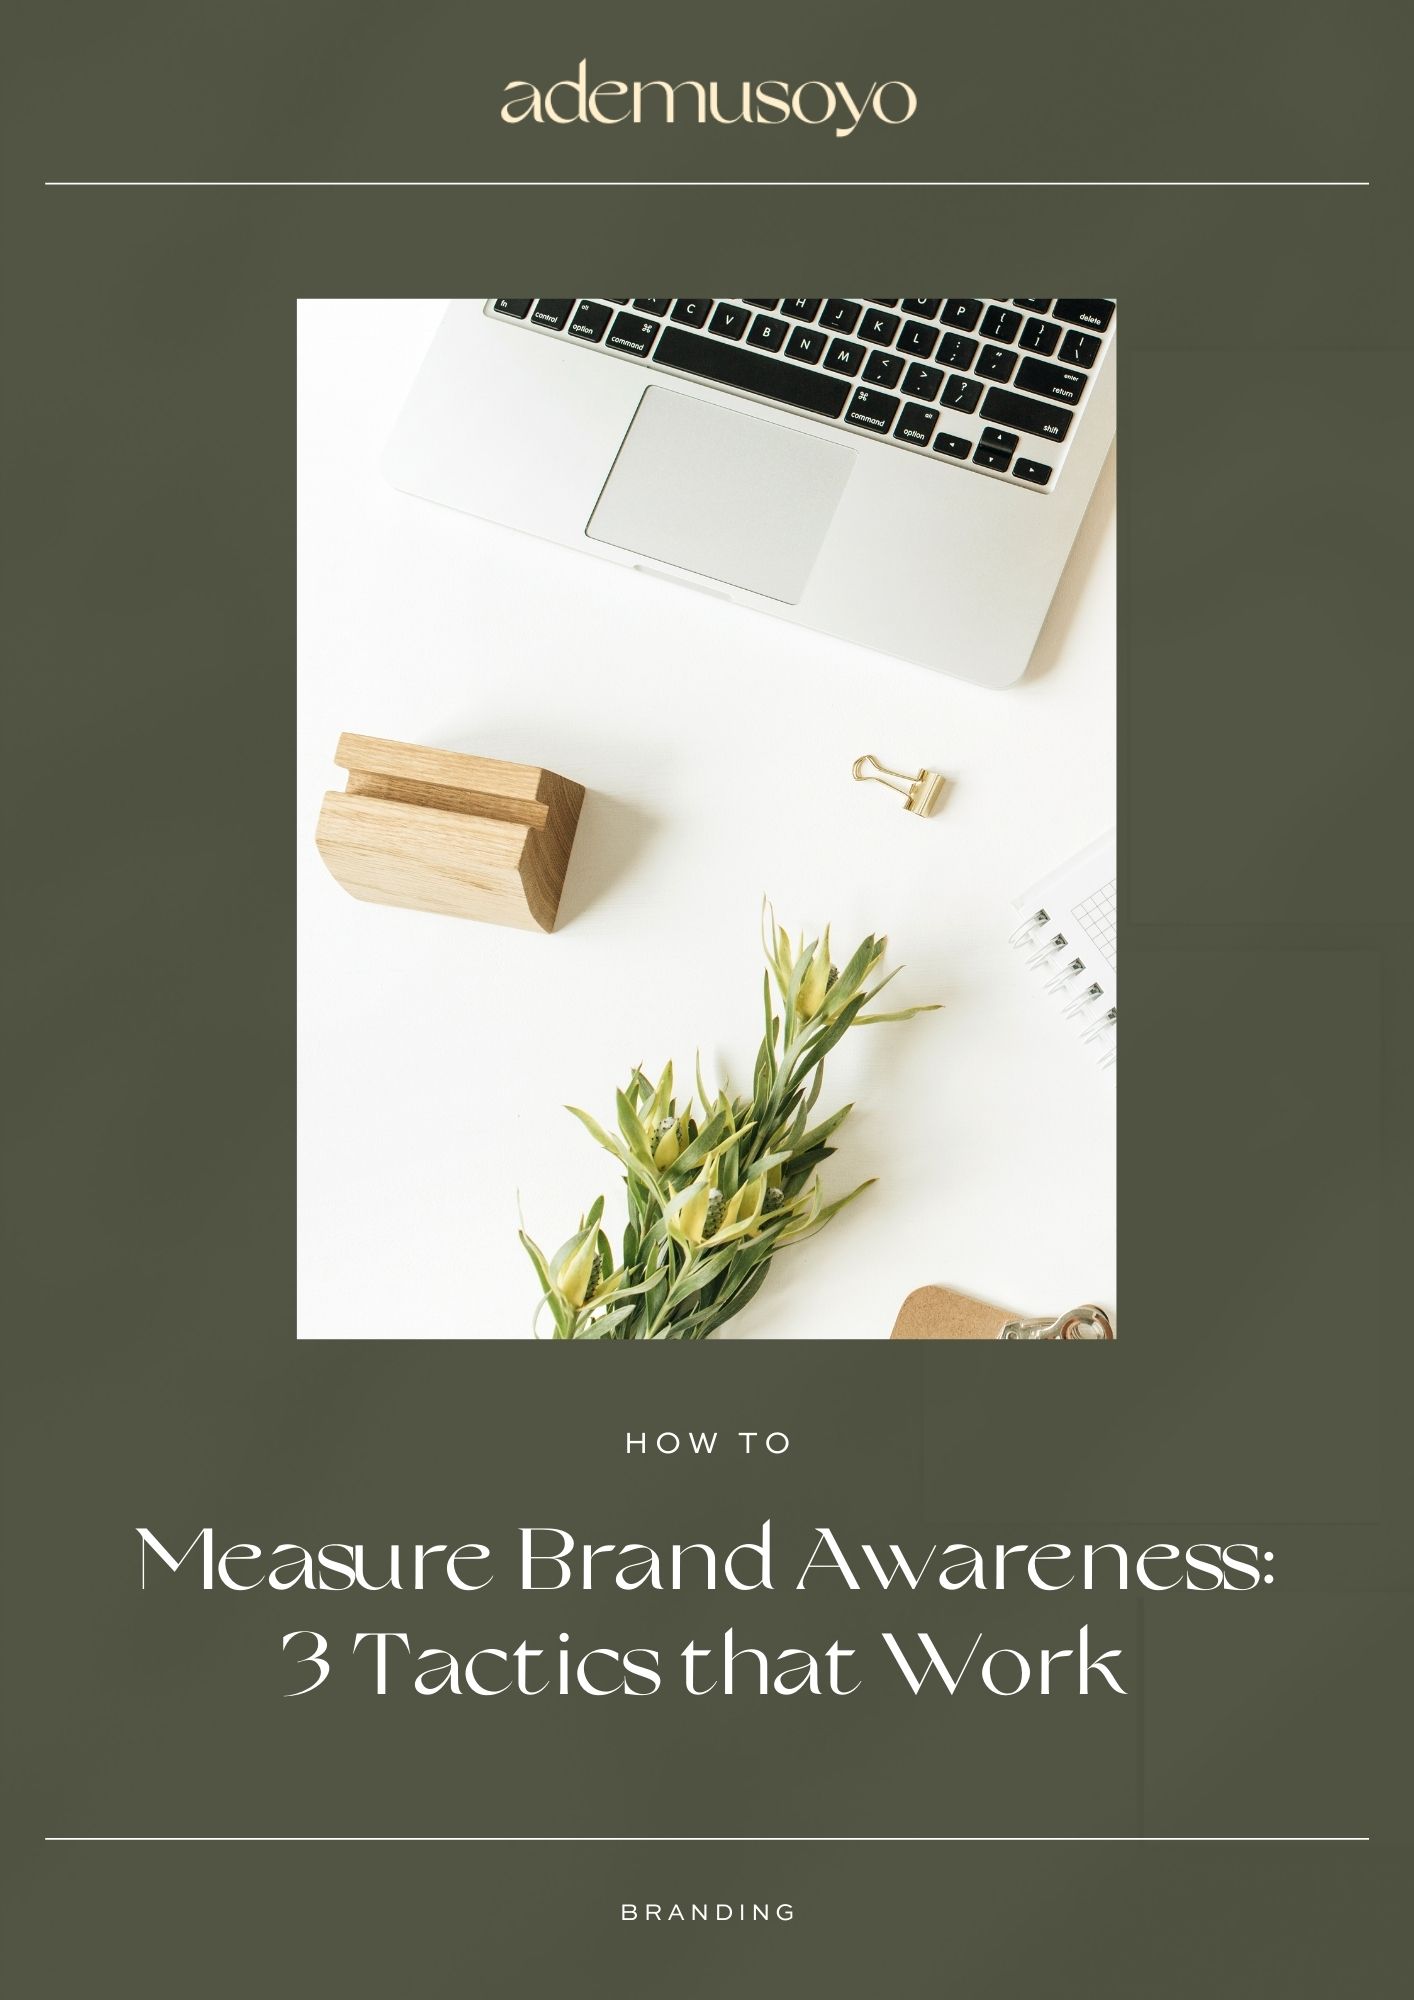 an image of a laptop keyboard with a flower and a text overlay that says how to measure brand awareness 3 tactics that work